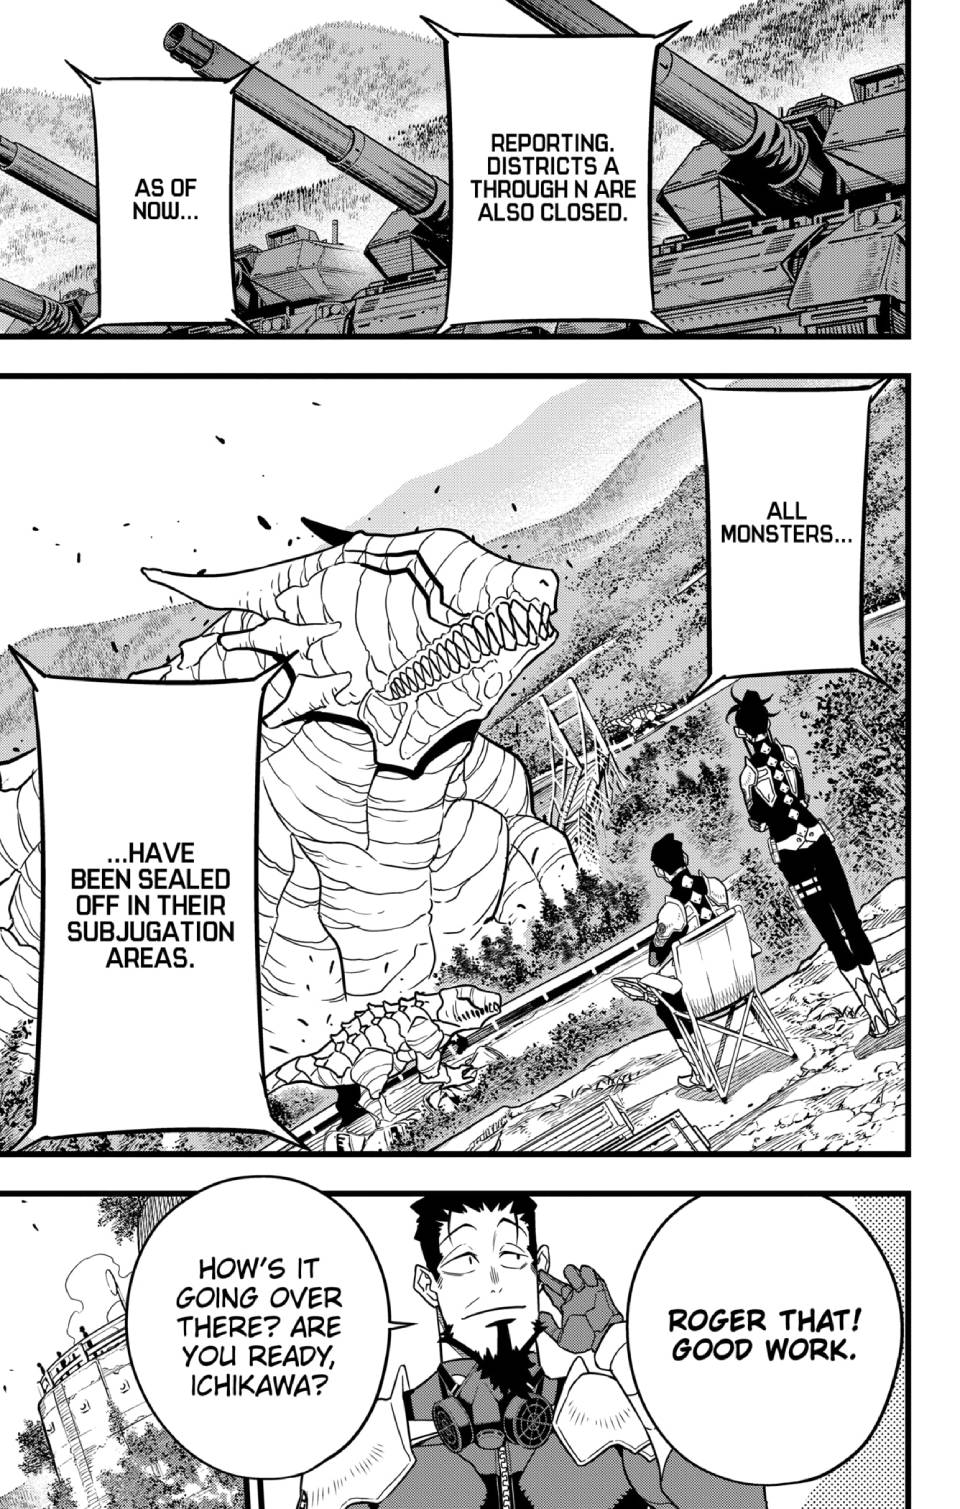 Kaiju no 8 Chapter 60, monster #8 chapter 60